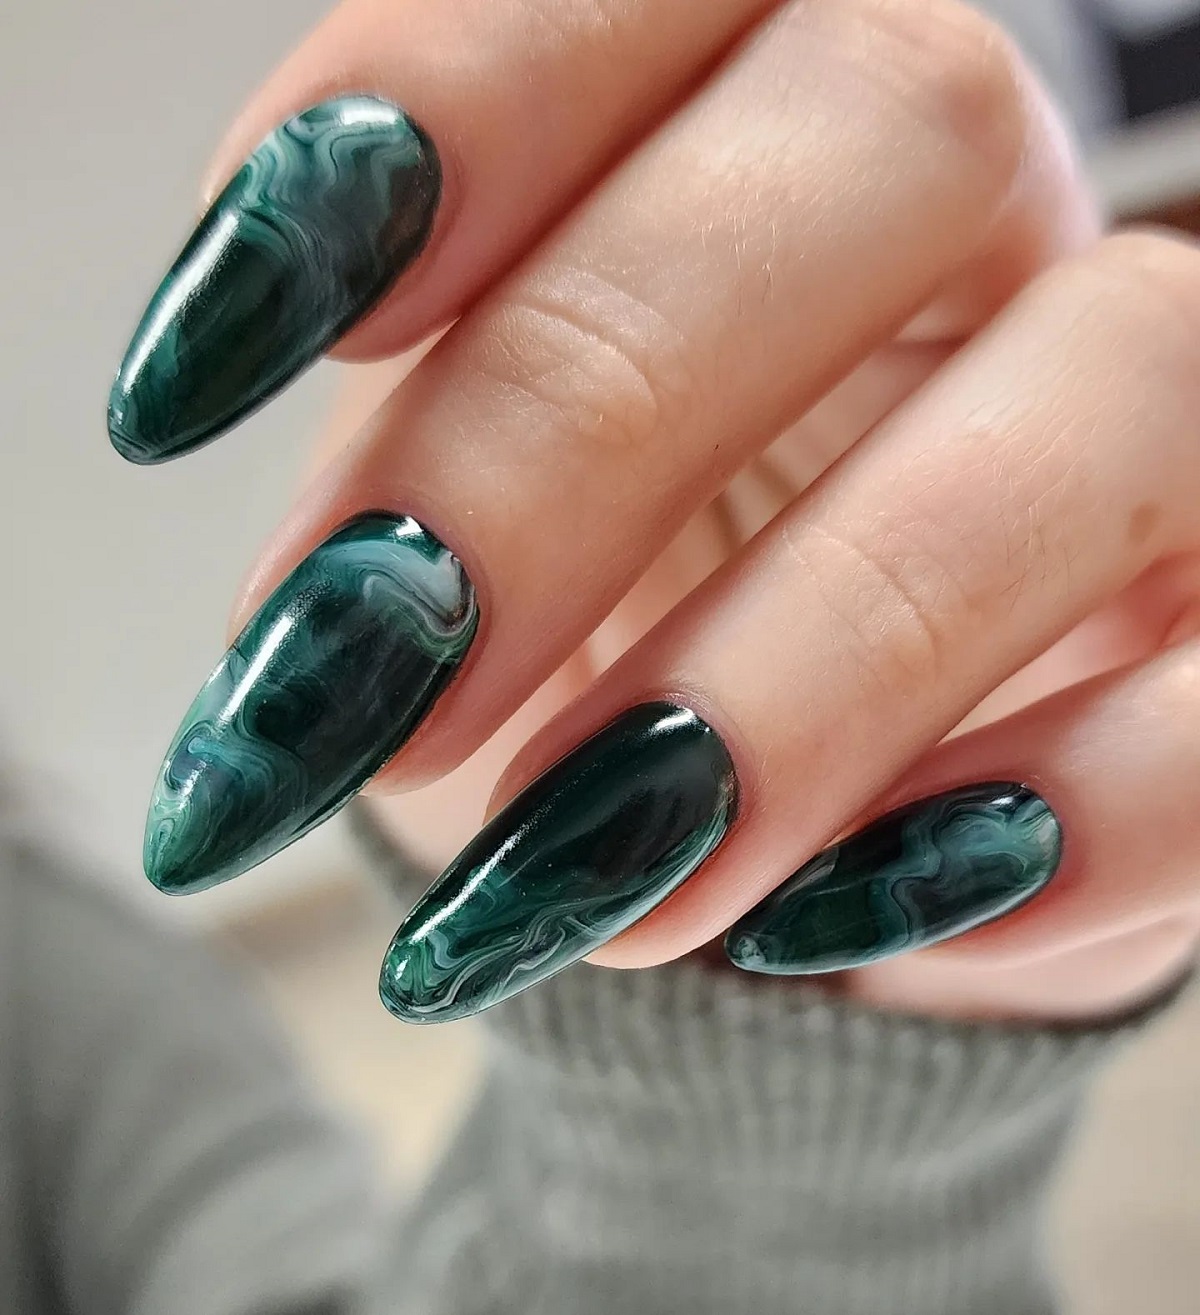 Jelly Green